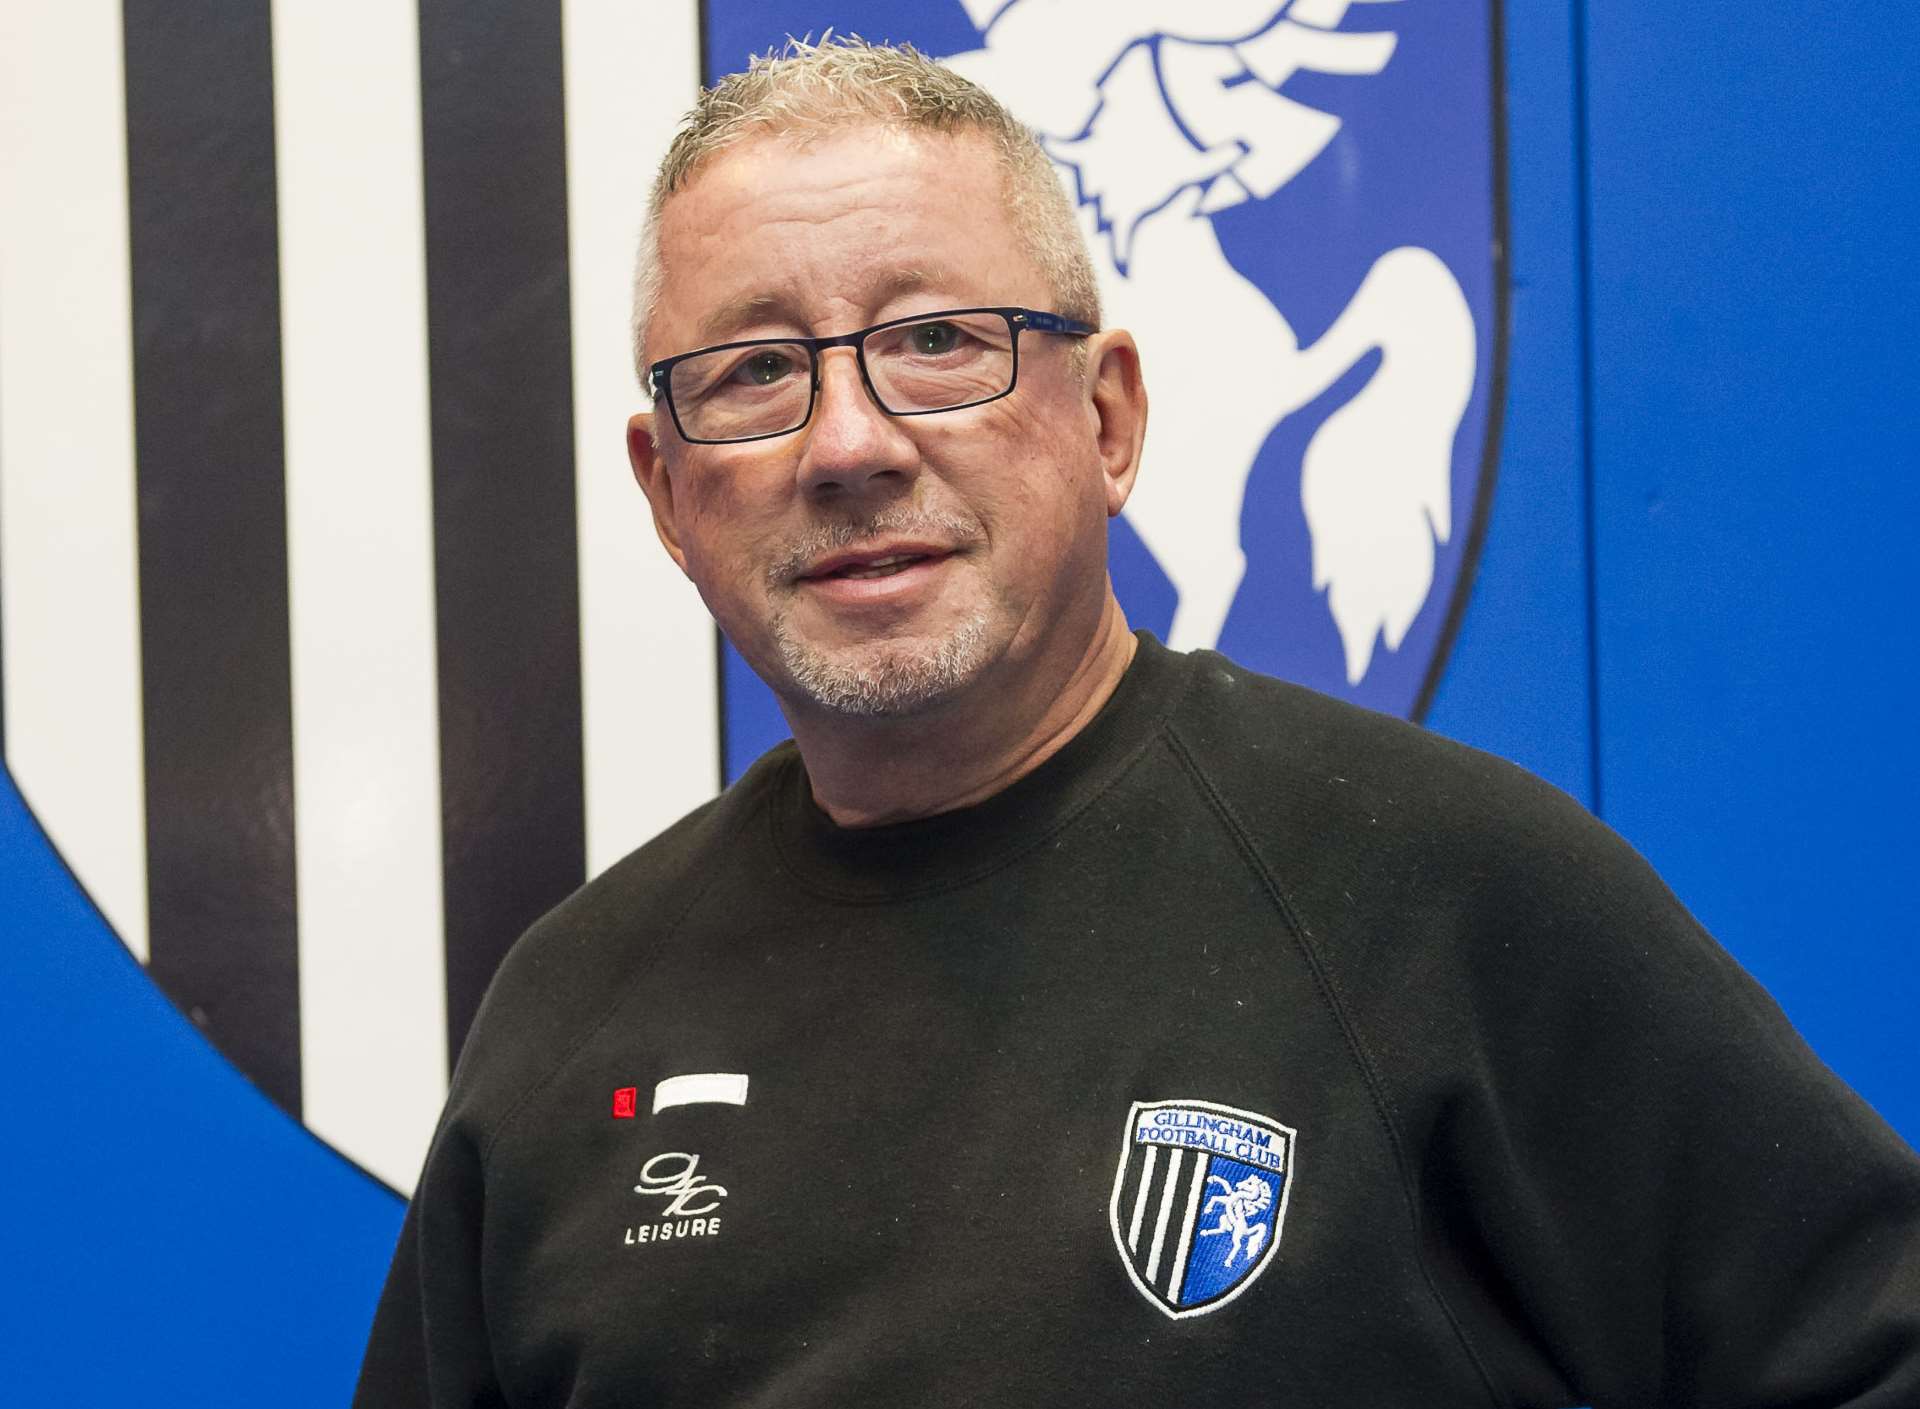 Gillingham chairman Paul Scally. Picture: Andy Payton